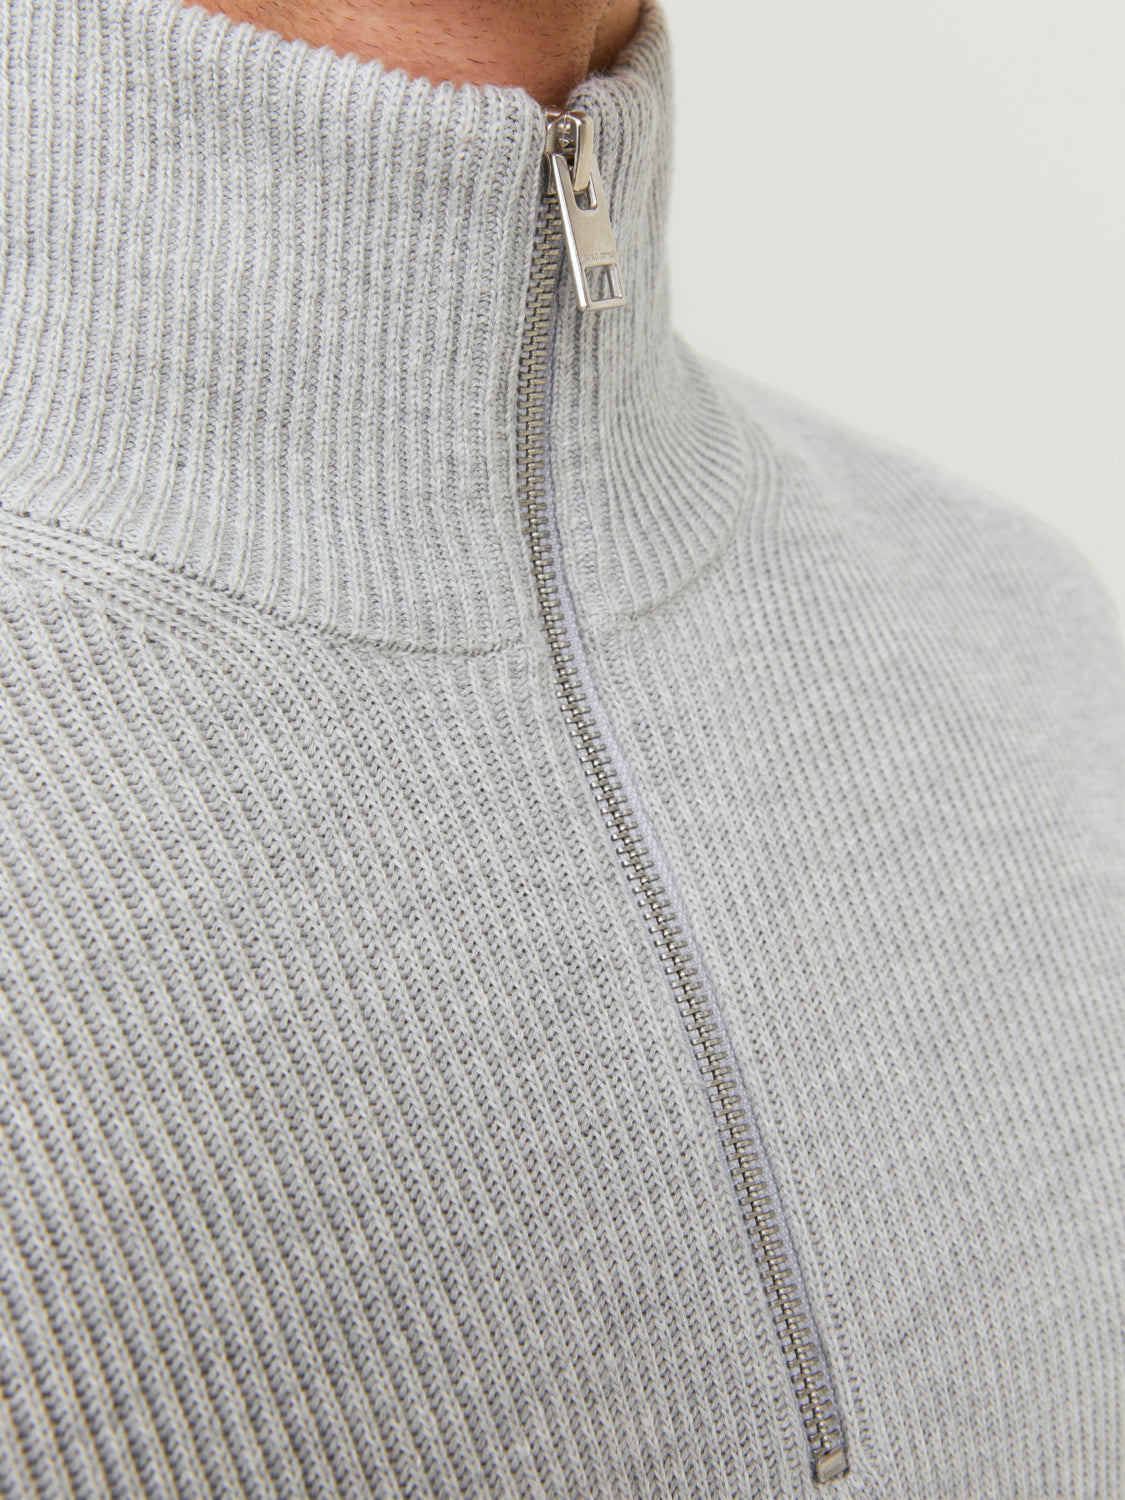 JPRCCPERFECT Pullover - Cool Grey